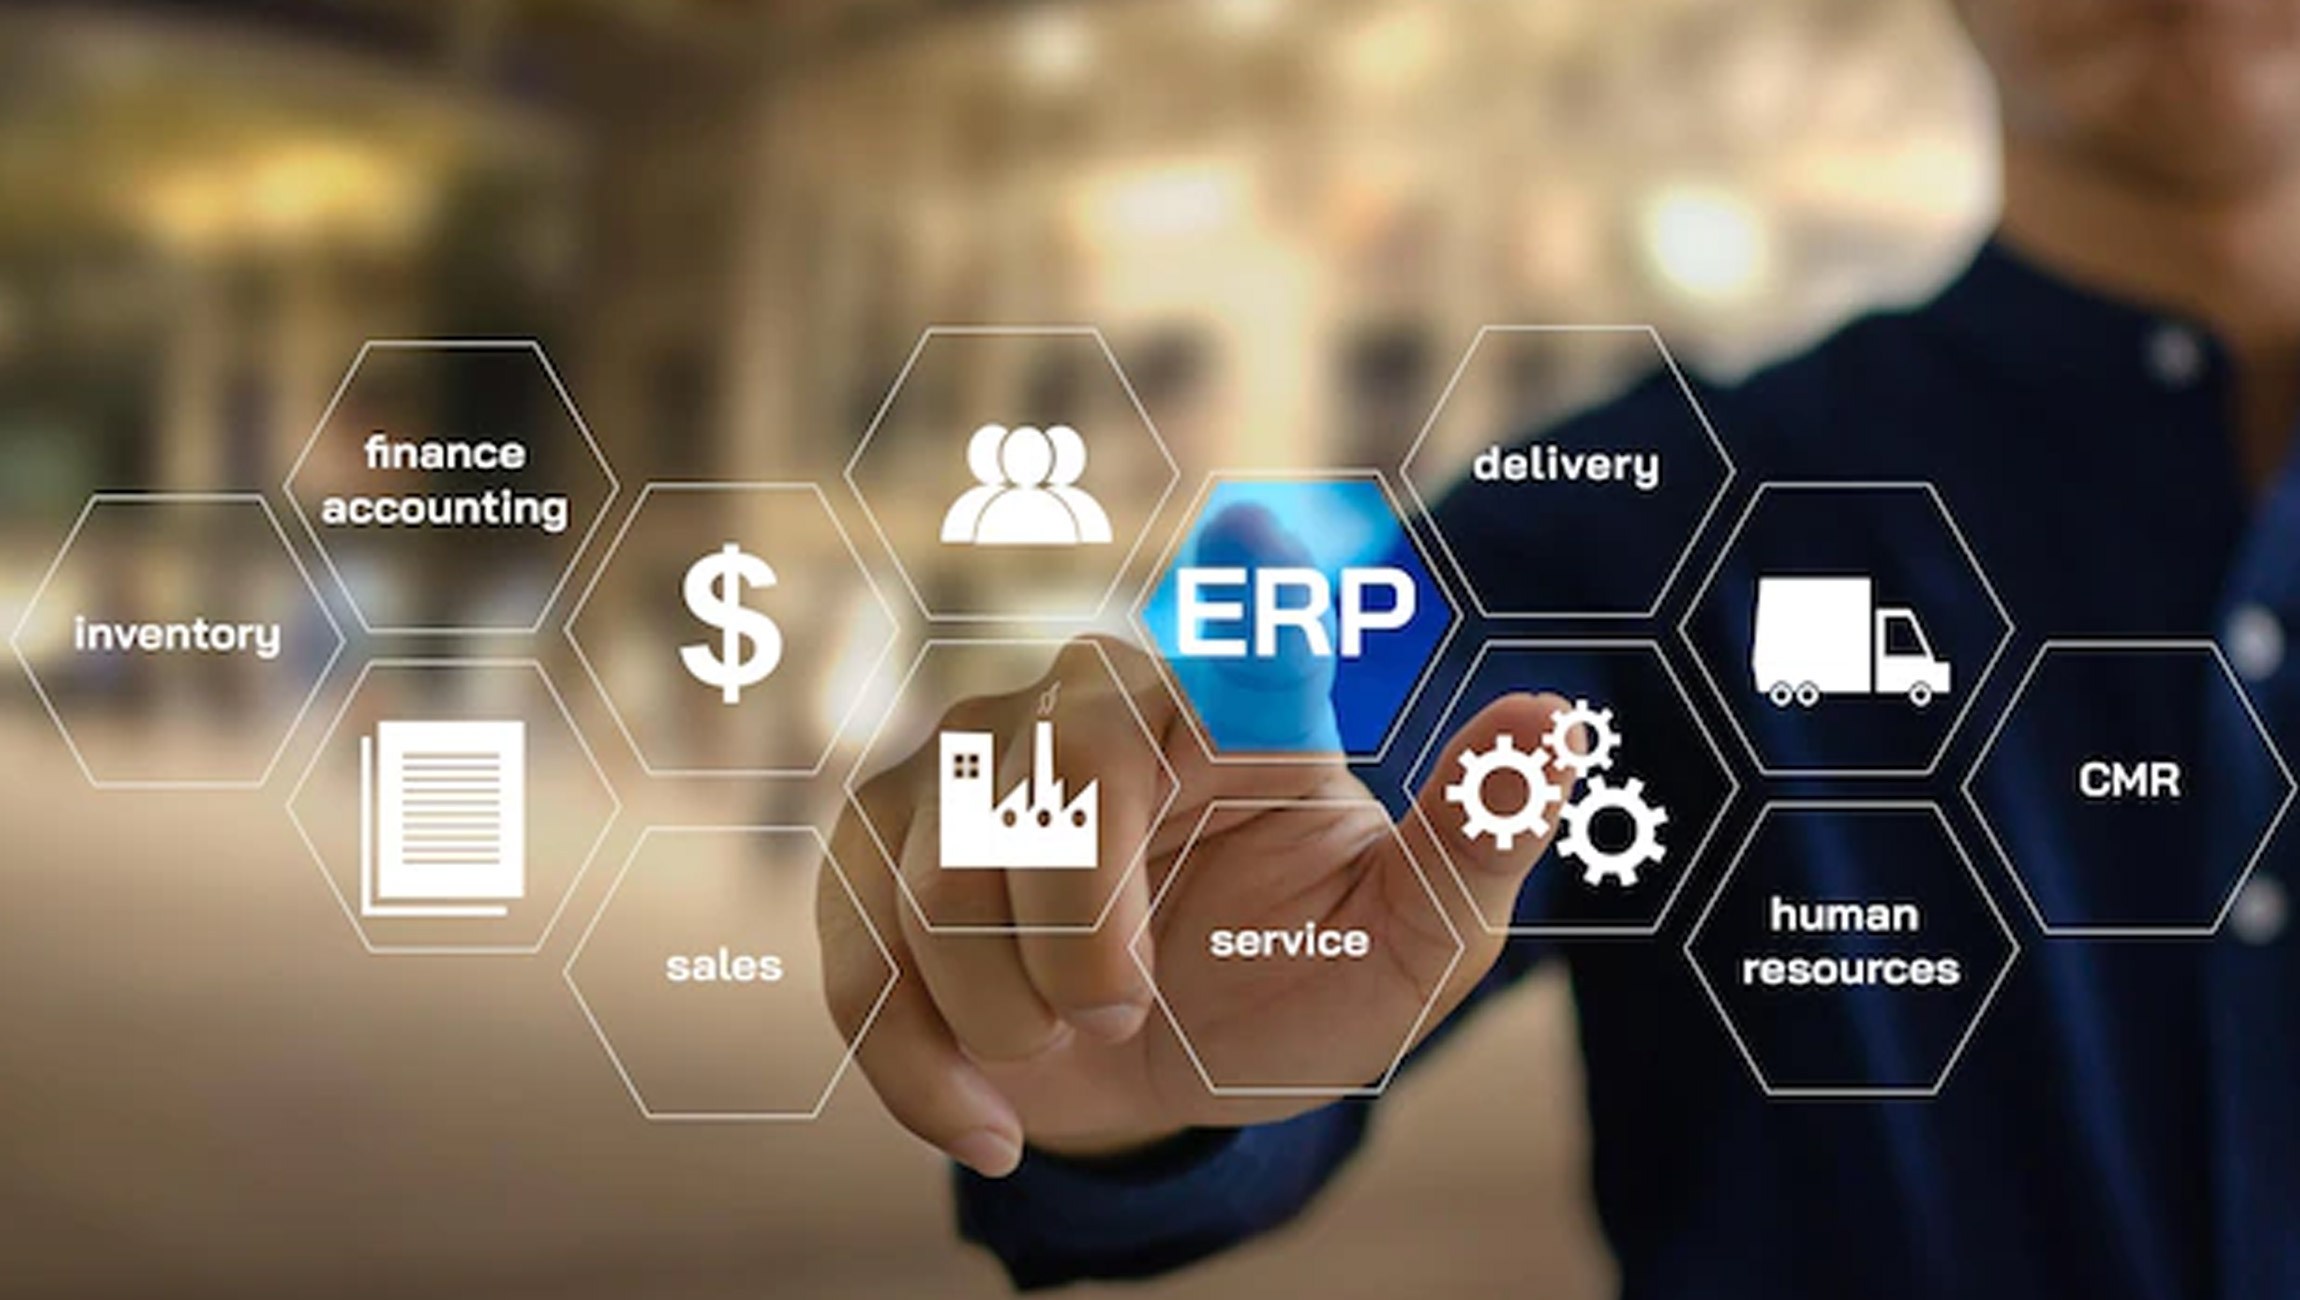 VAI Announces New Brand Vision for 2023 Focusing on Cloud-based ERP for Enterprise Success